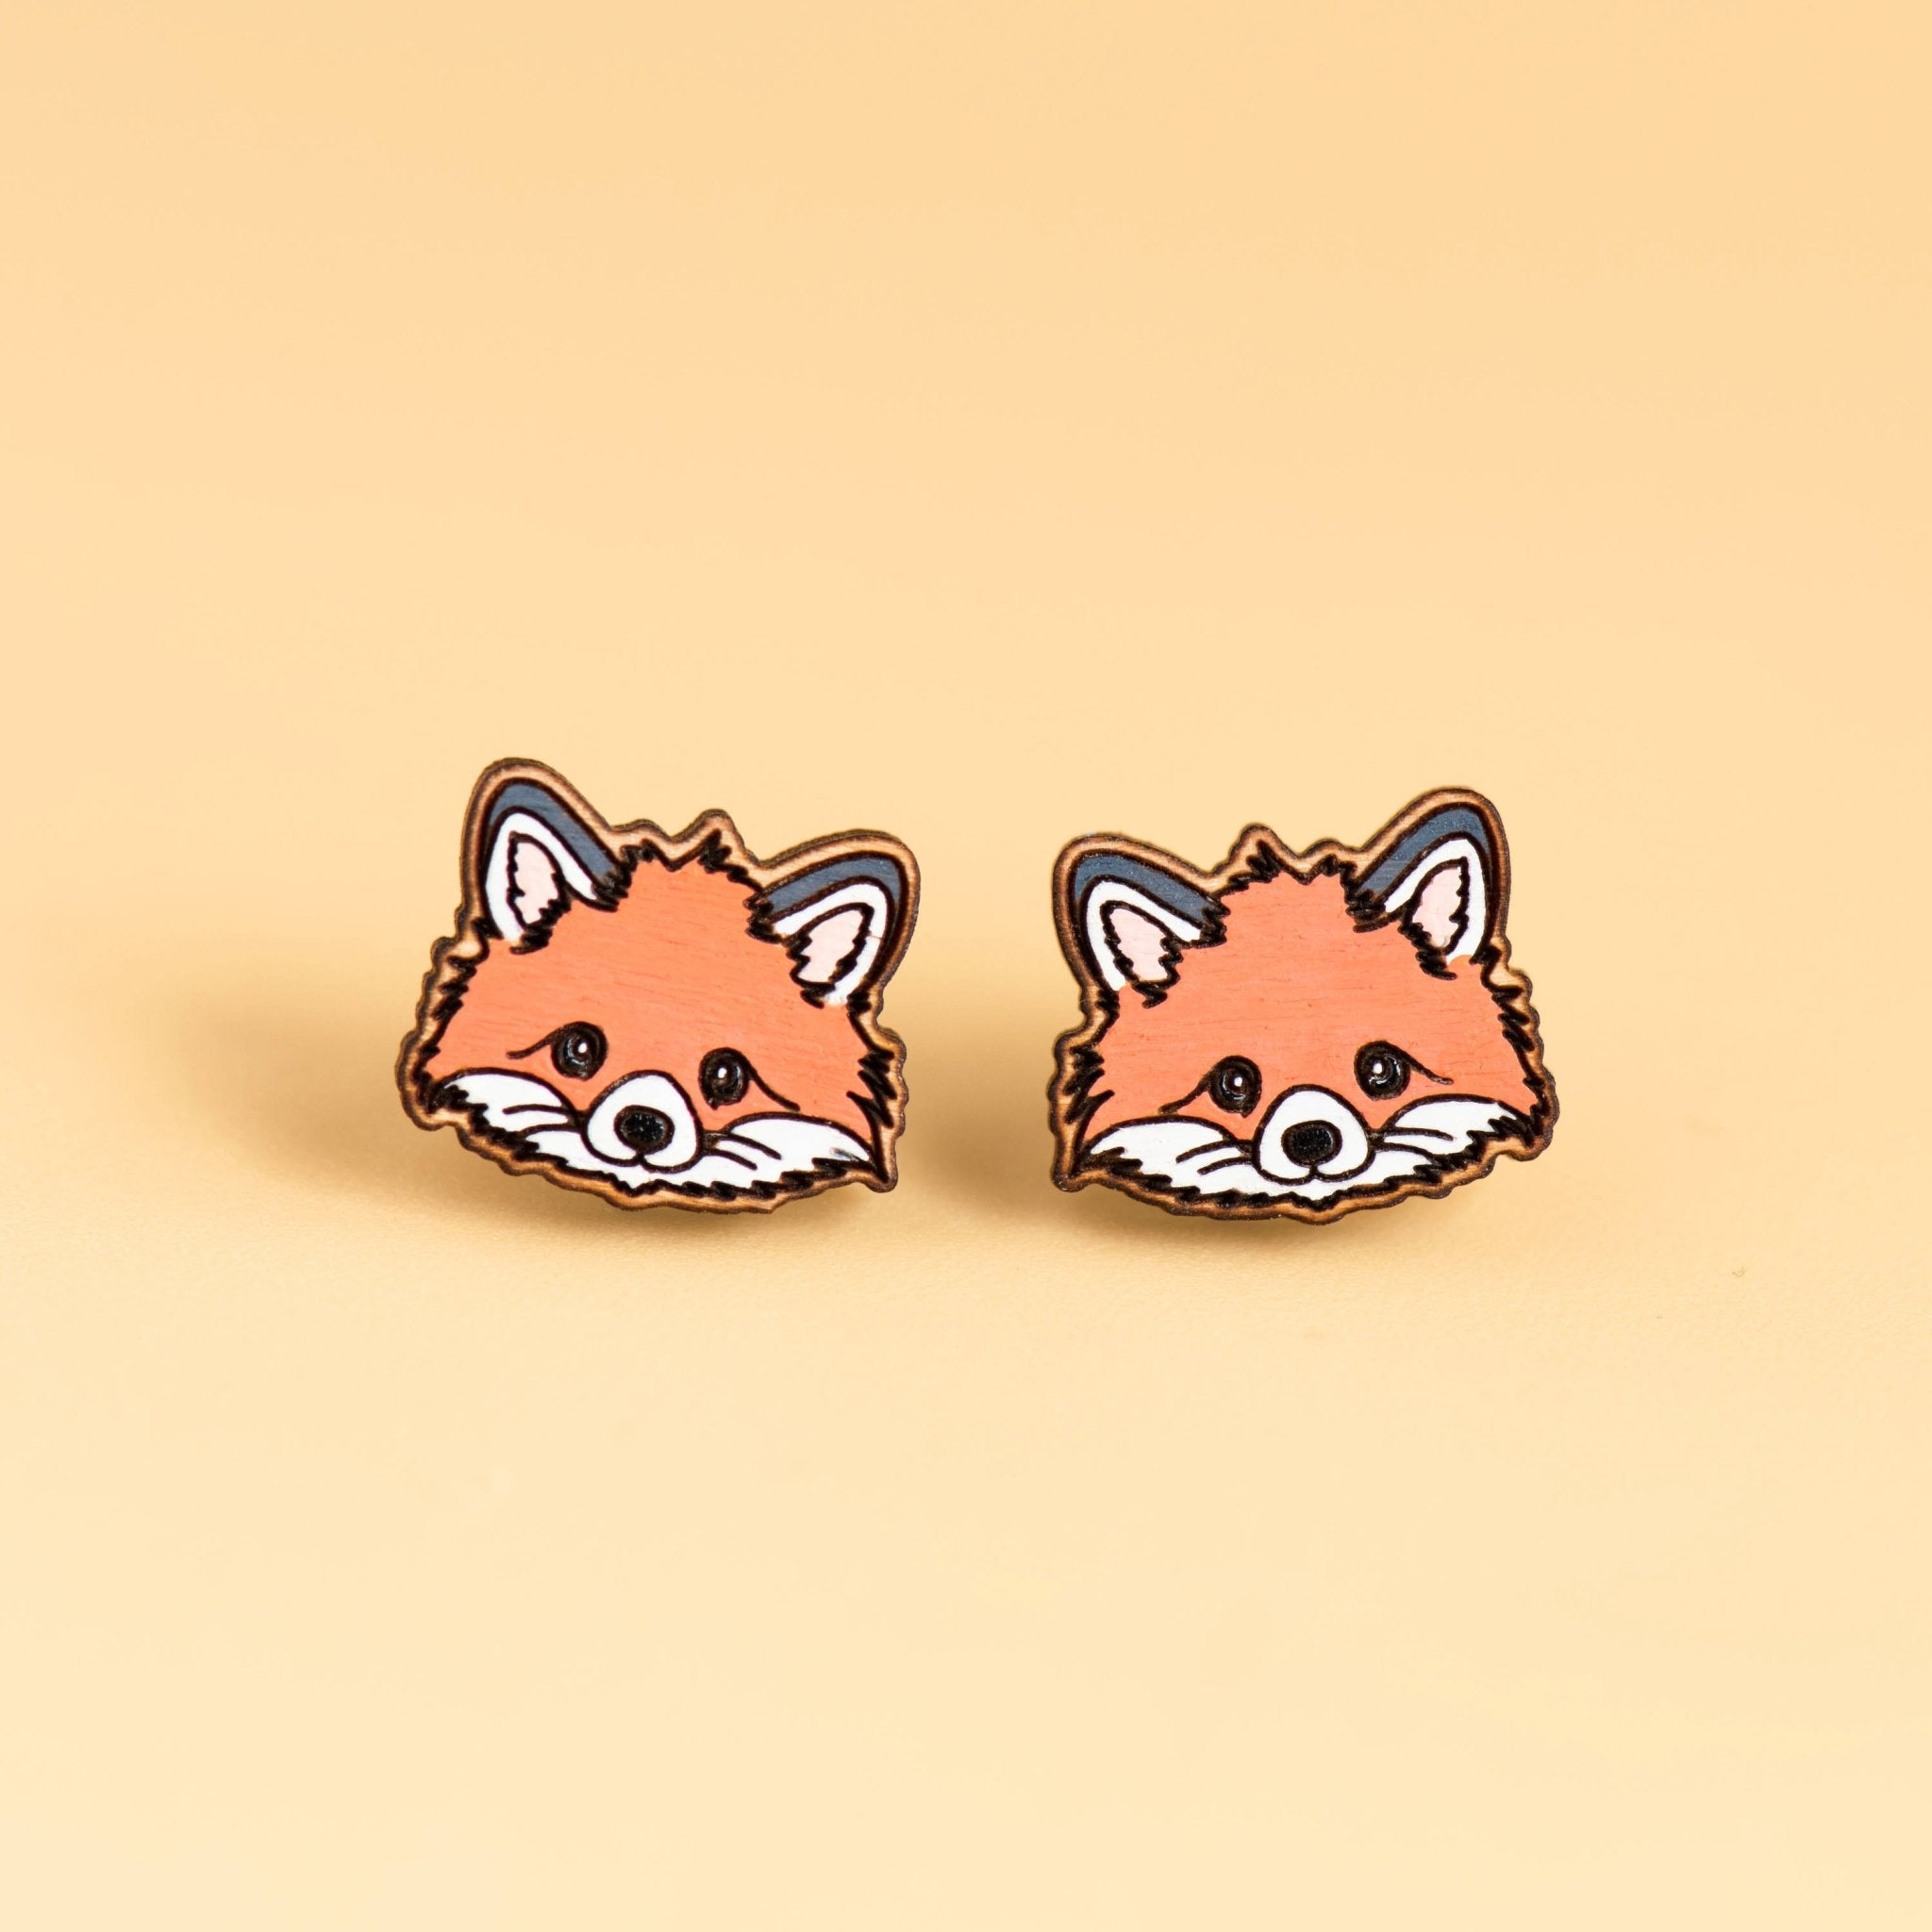 Hand-painted Red Fox Earrings Cherry Wood Earrings - PEL10178 - Robin Valley Official Store